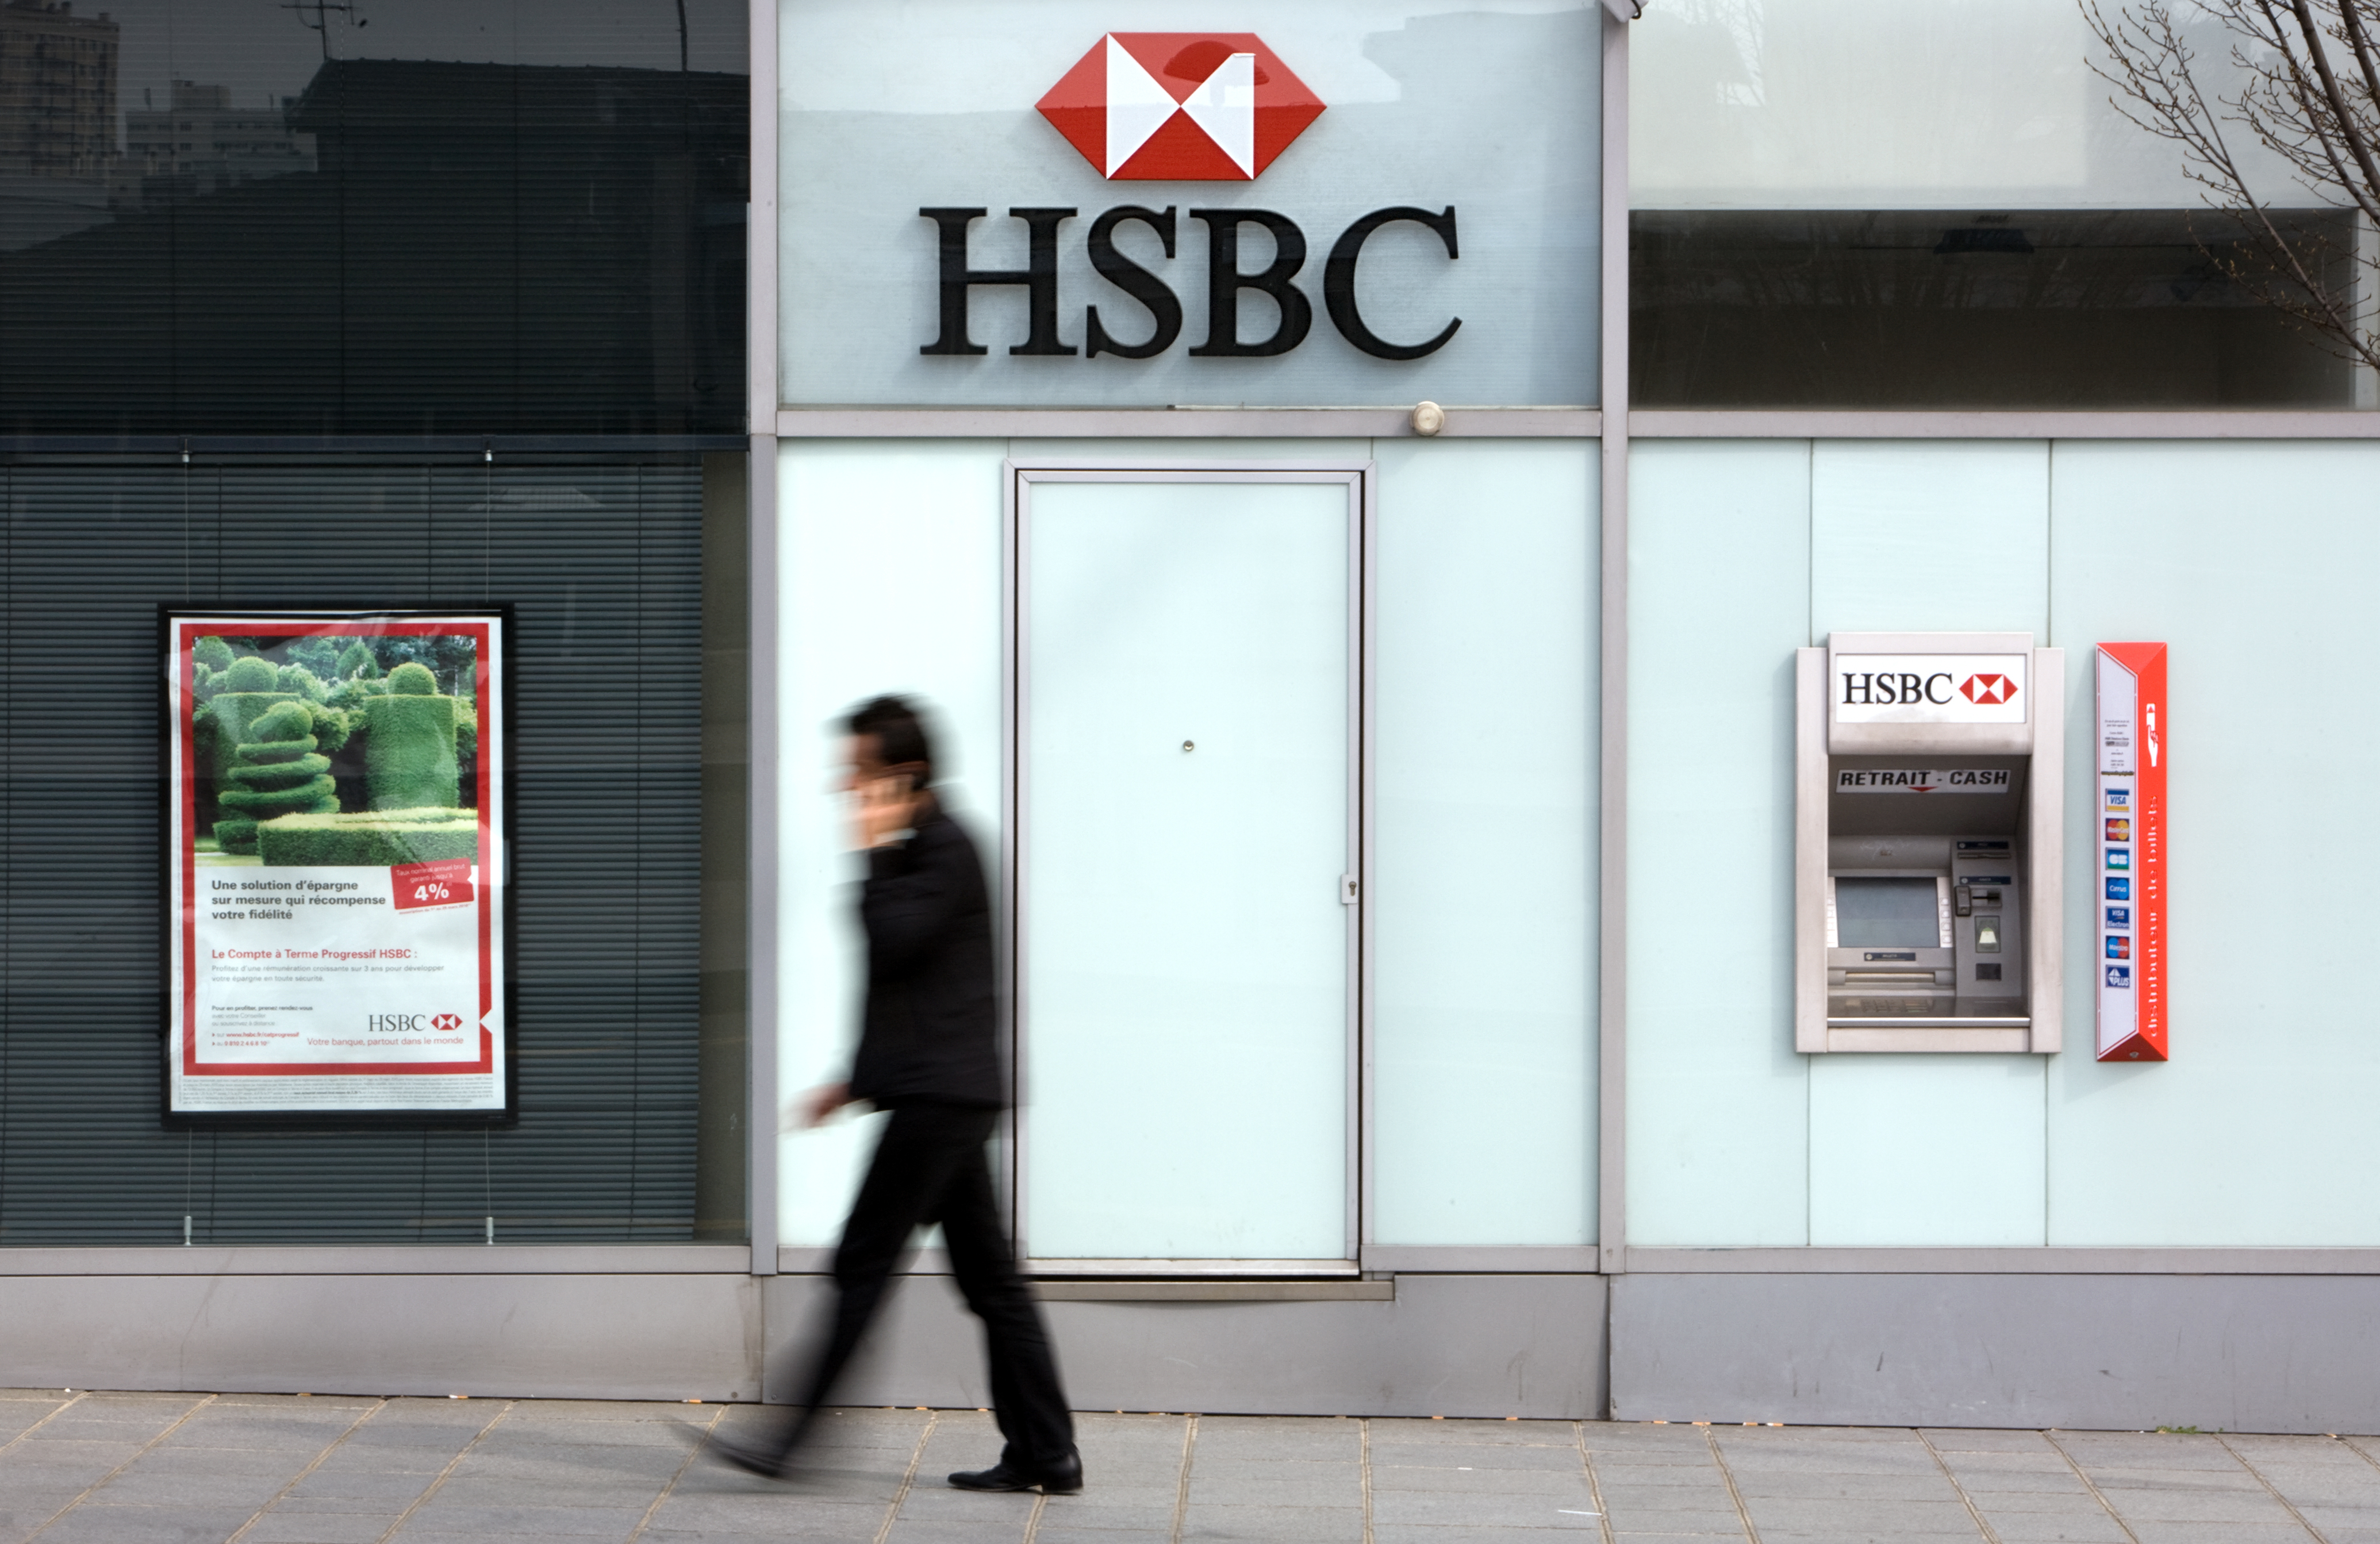 (FILES) In this file photograph taken on March 24, 2010, a pedestrian walks past a branch of international banking firm HSBC in Paris. - HSBC announced a radical overhaul on February 18, 2020, including plans to slash 35,000 jobs and slim operations in the United States and Europe, after profits slid by a third last year. The Asia-focused lender has been trying to lower costs as it faces a multitude of uncertainties caused by the grinding US-China trade war, Britain's departure from the European Union and now the deadly new coronavirus in China. (Photo by Loic VENANCE / AFP)